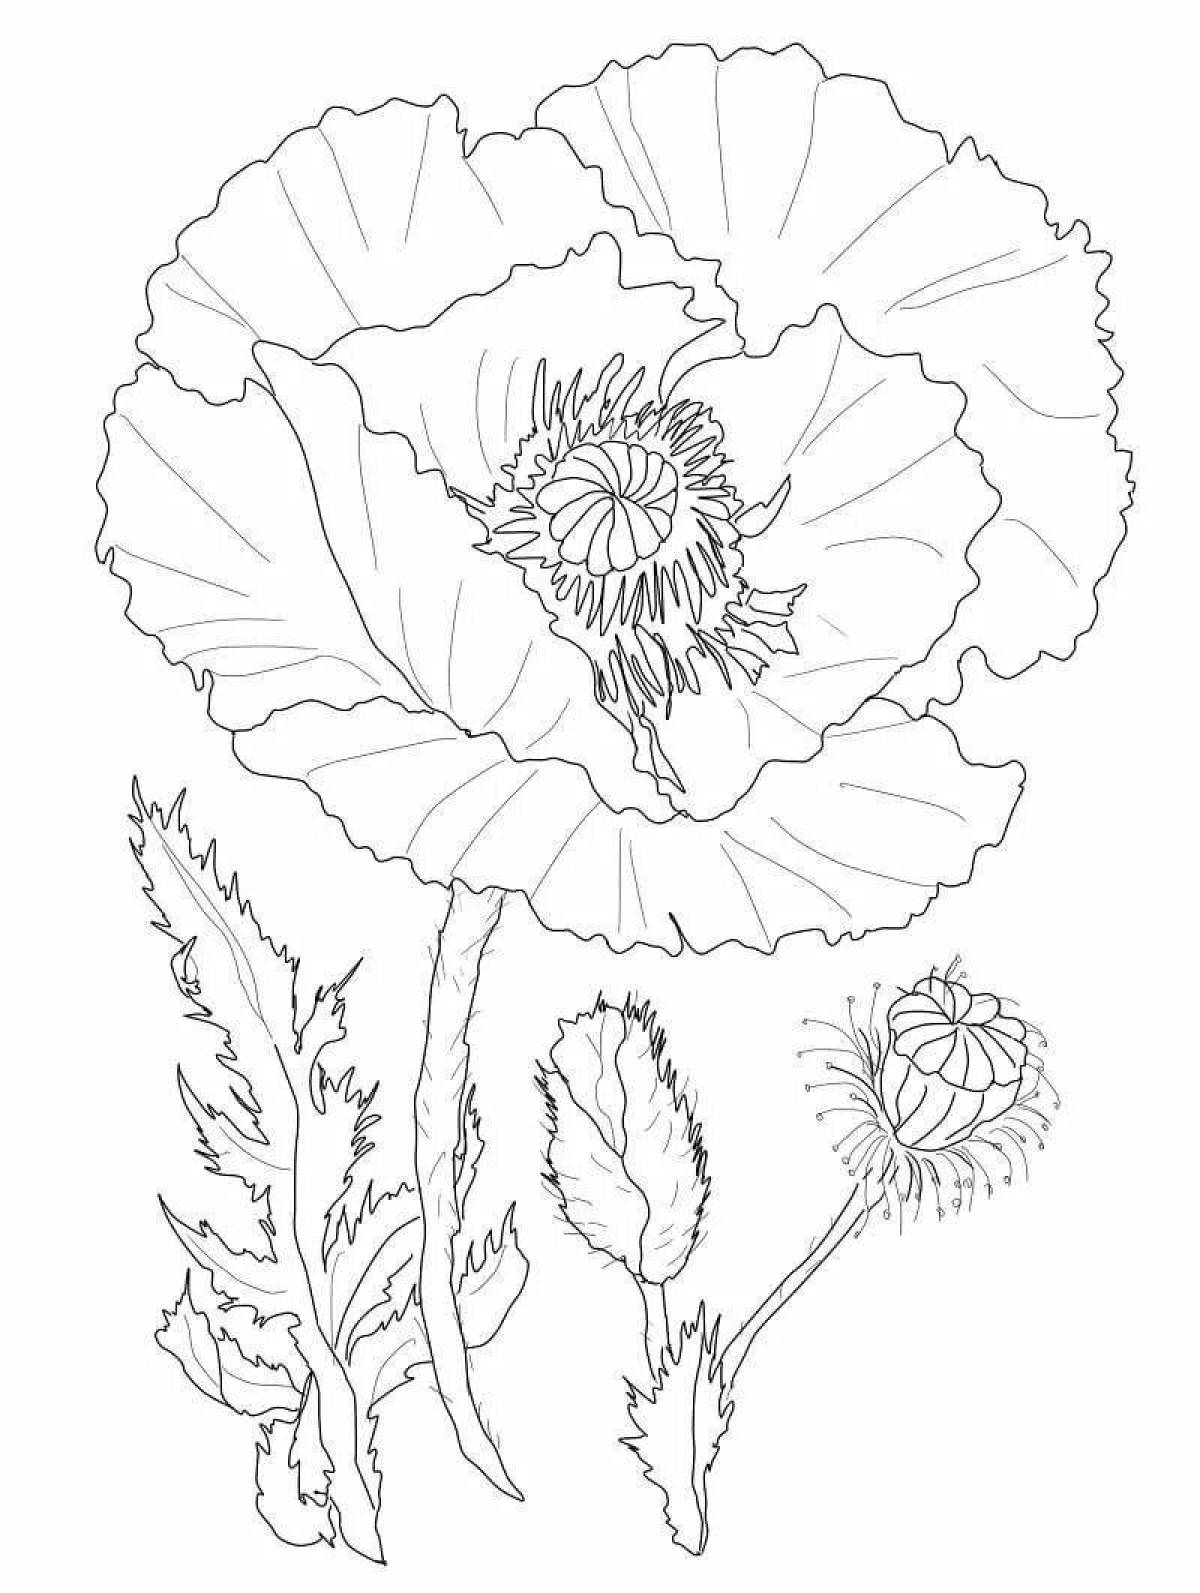 Fabulous poppy coloring for kids